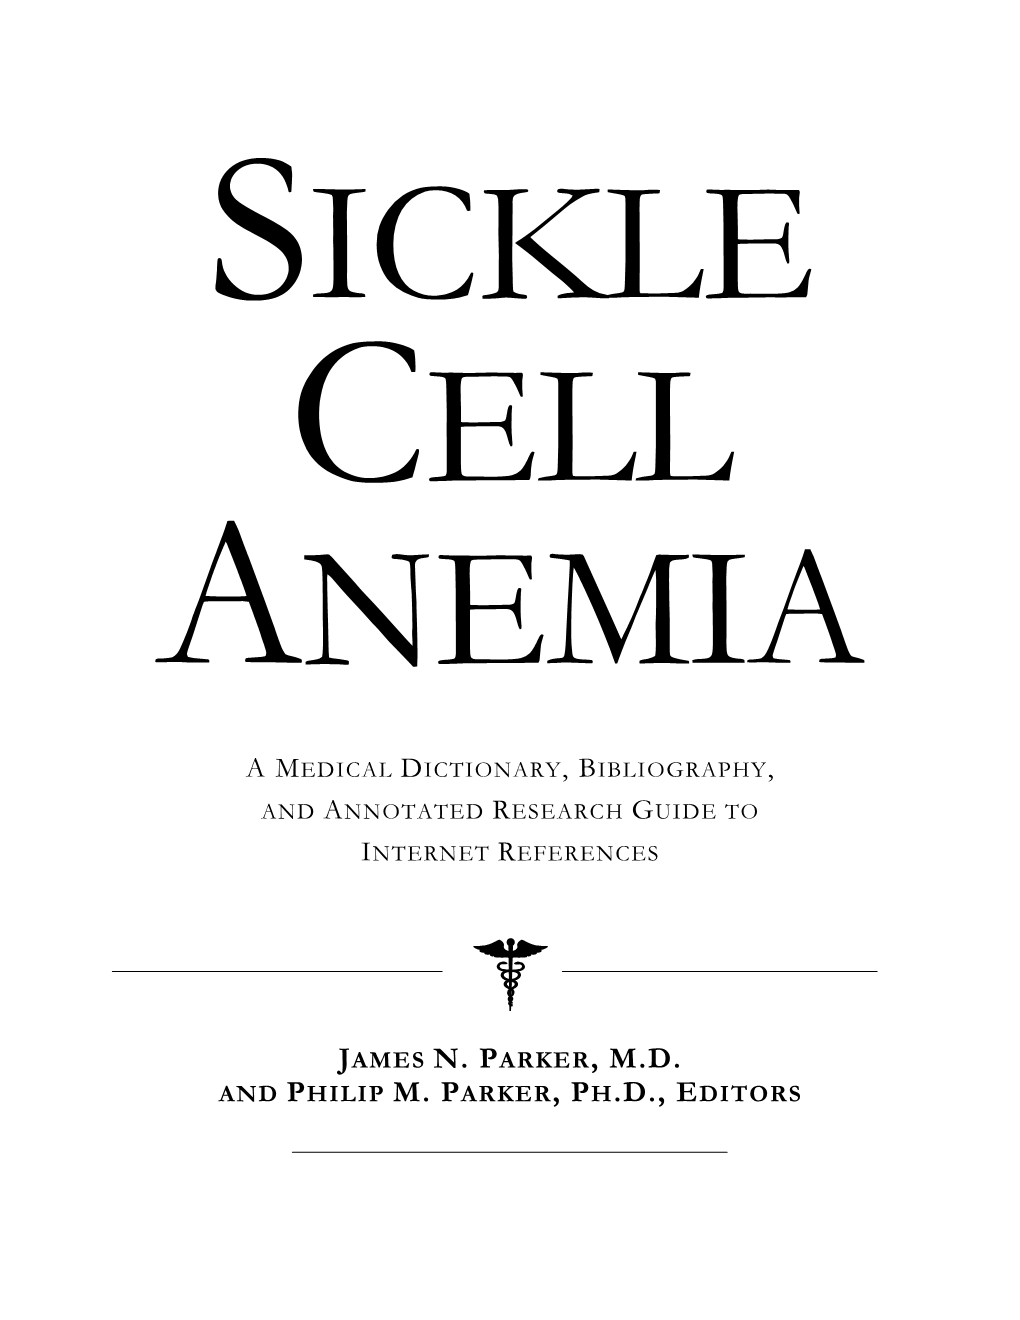 Sickle Cell Anemia Dictionary